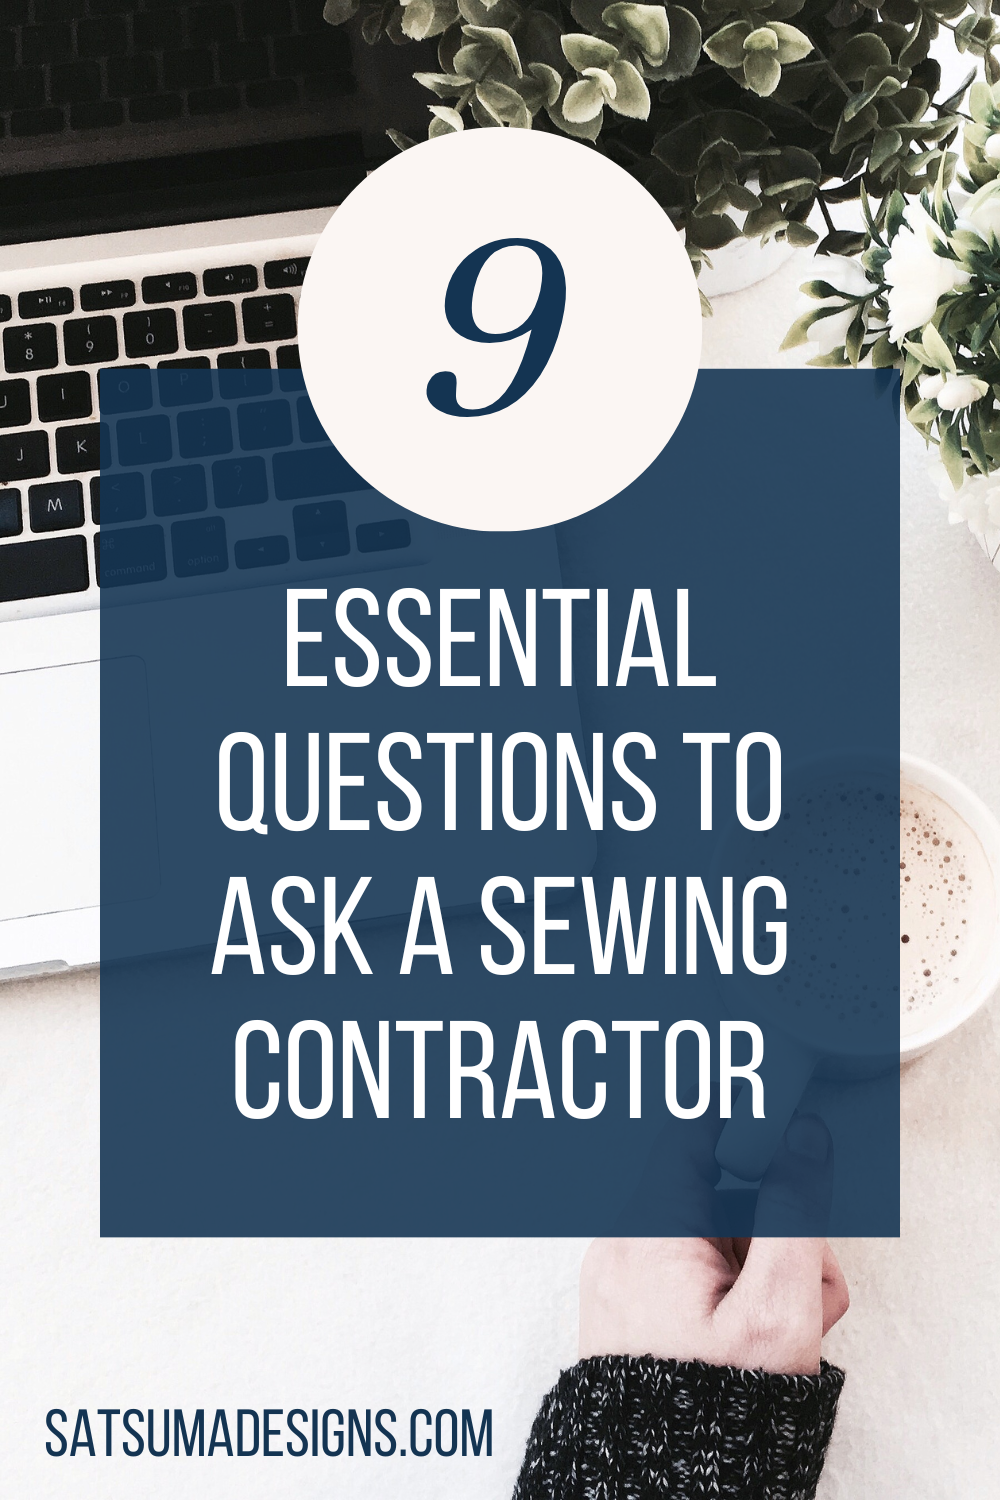 Photo of a computer and overlay title of blog - what to ask a sewing contractor